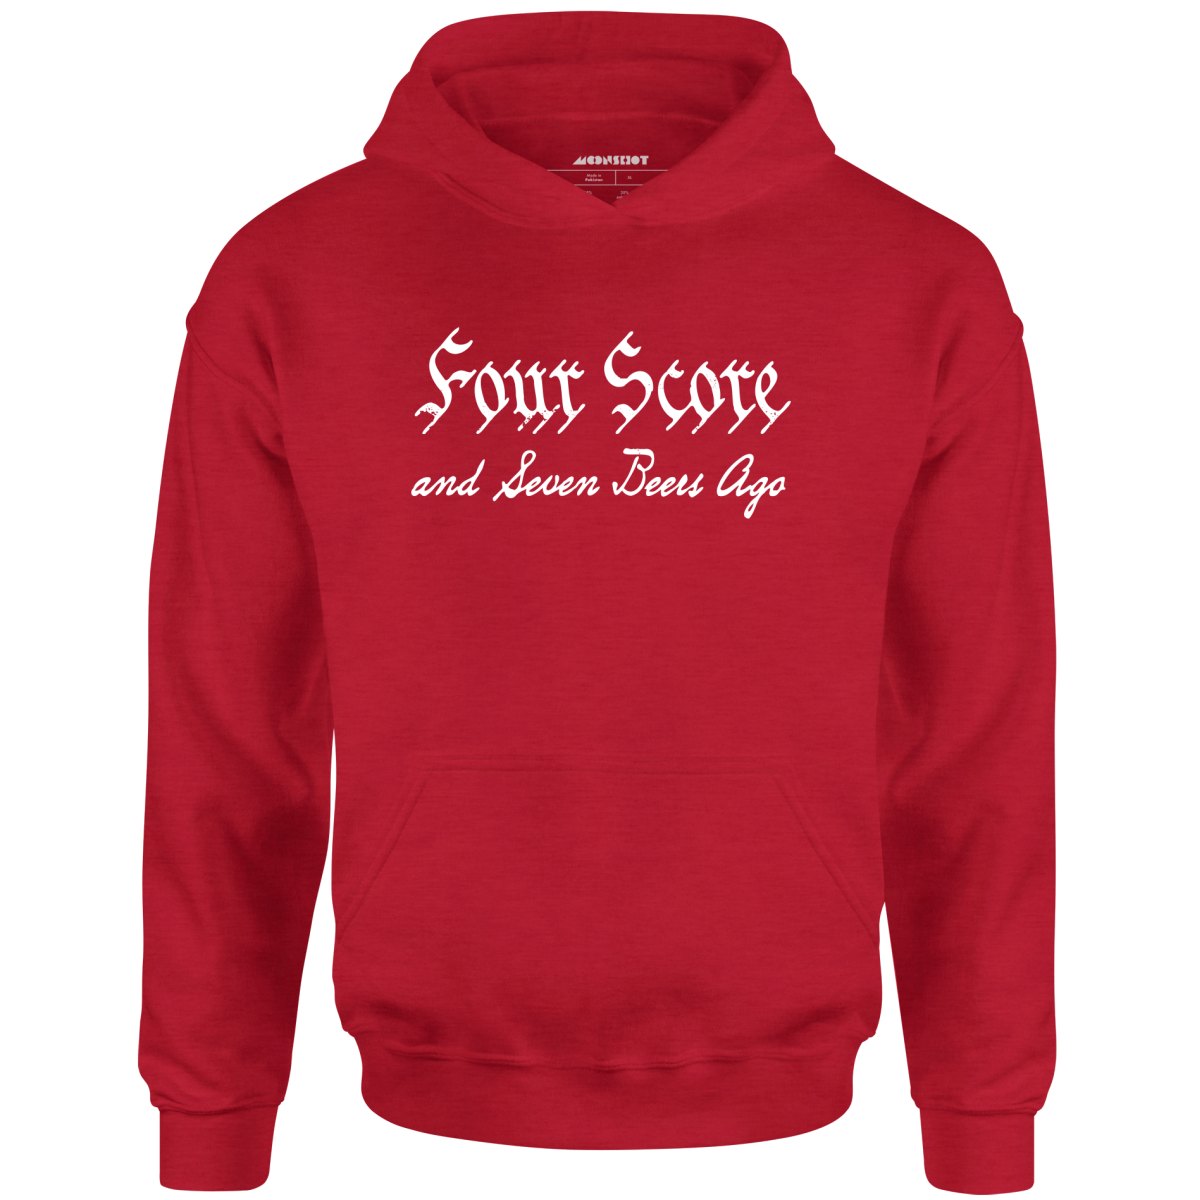 Four Score and Seven Beers Ago - Unisex Hoodie